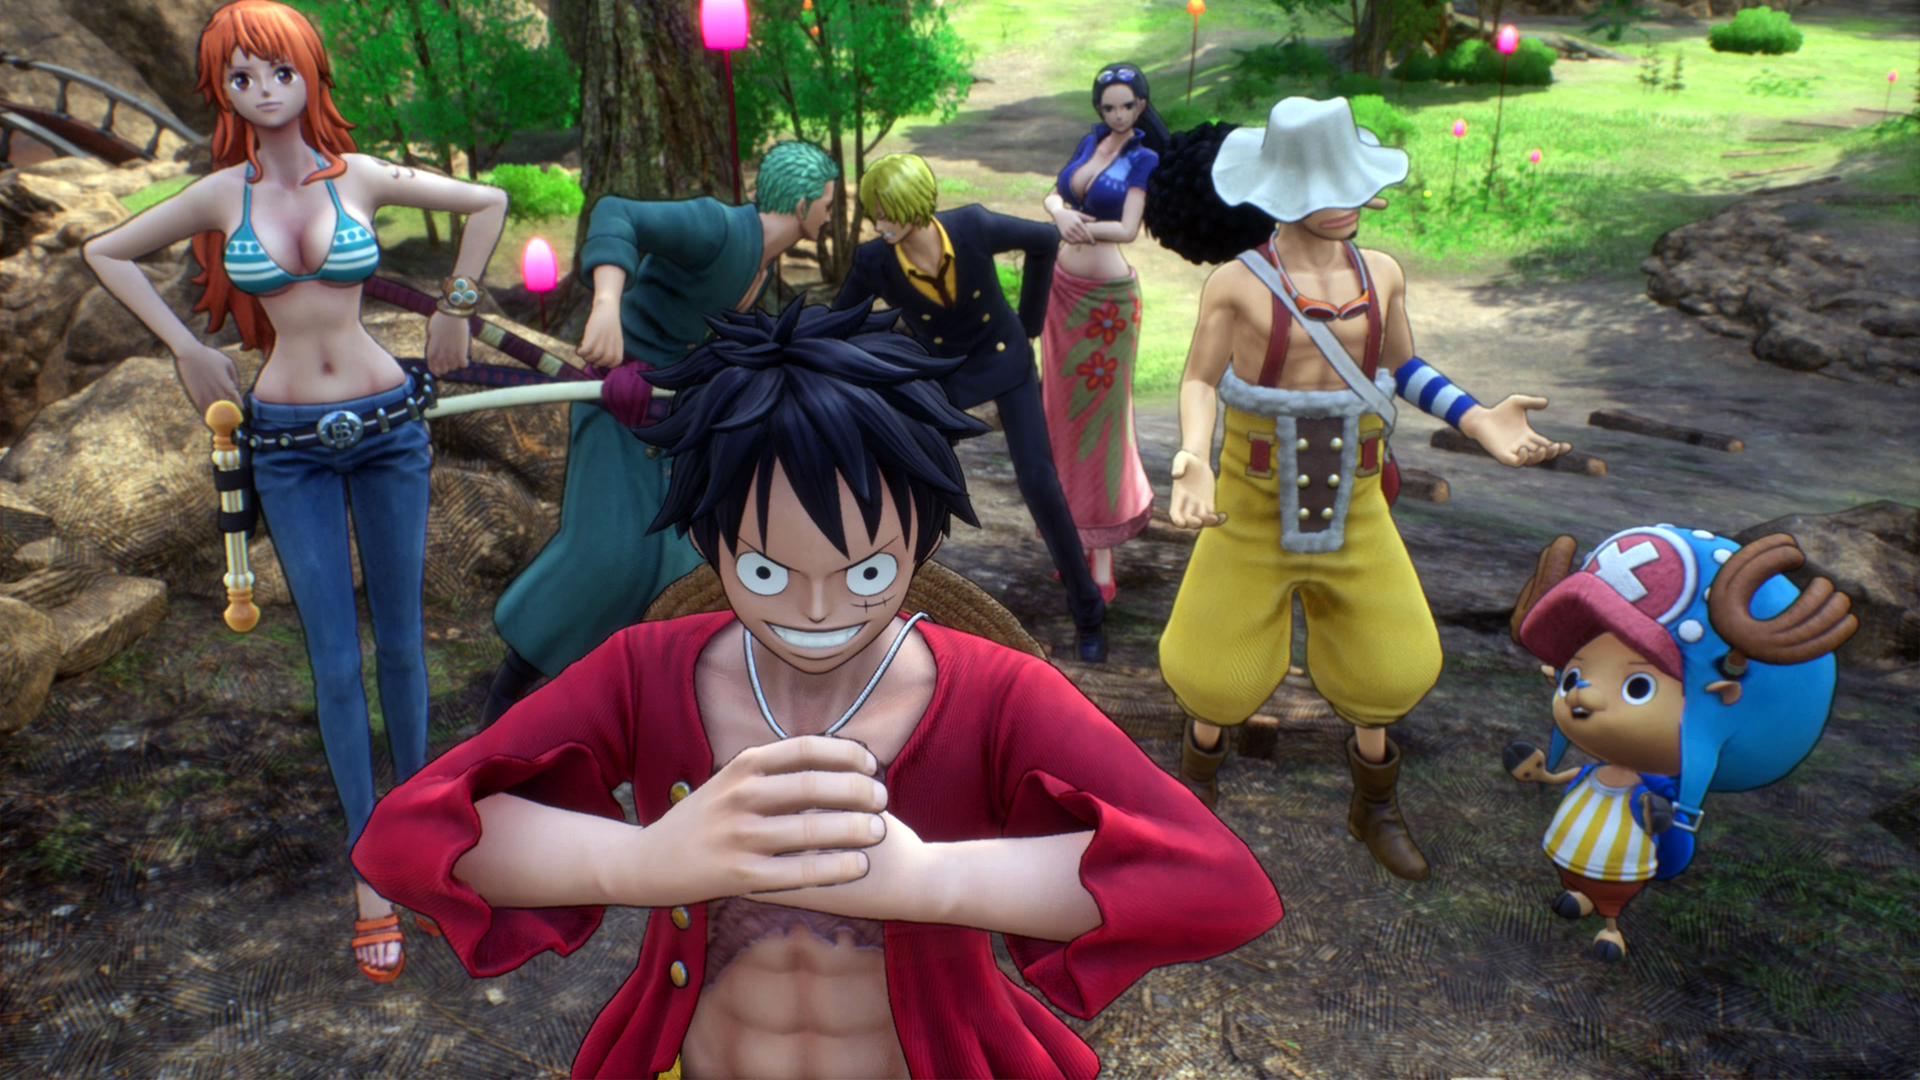 JRPG One Piece Odyssey is coming to PC